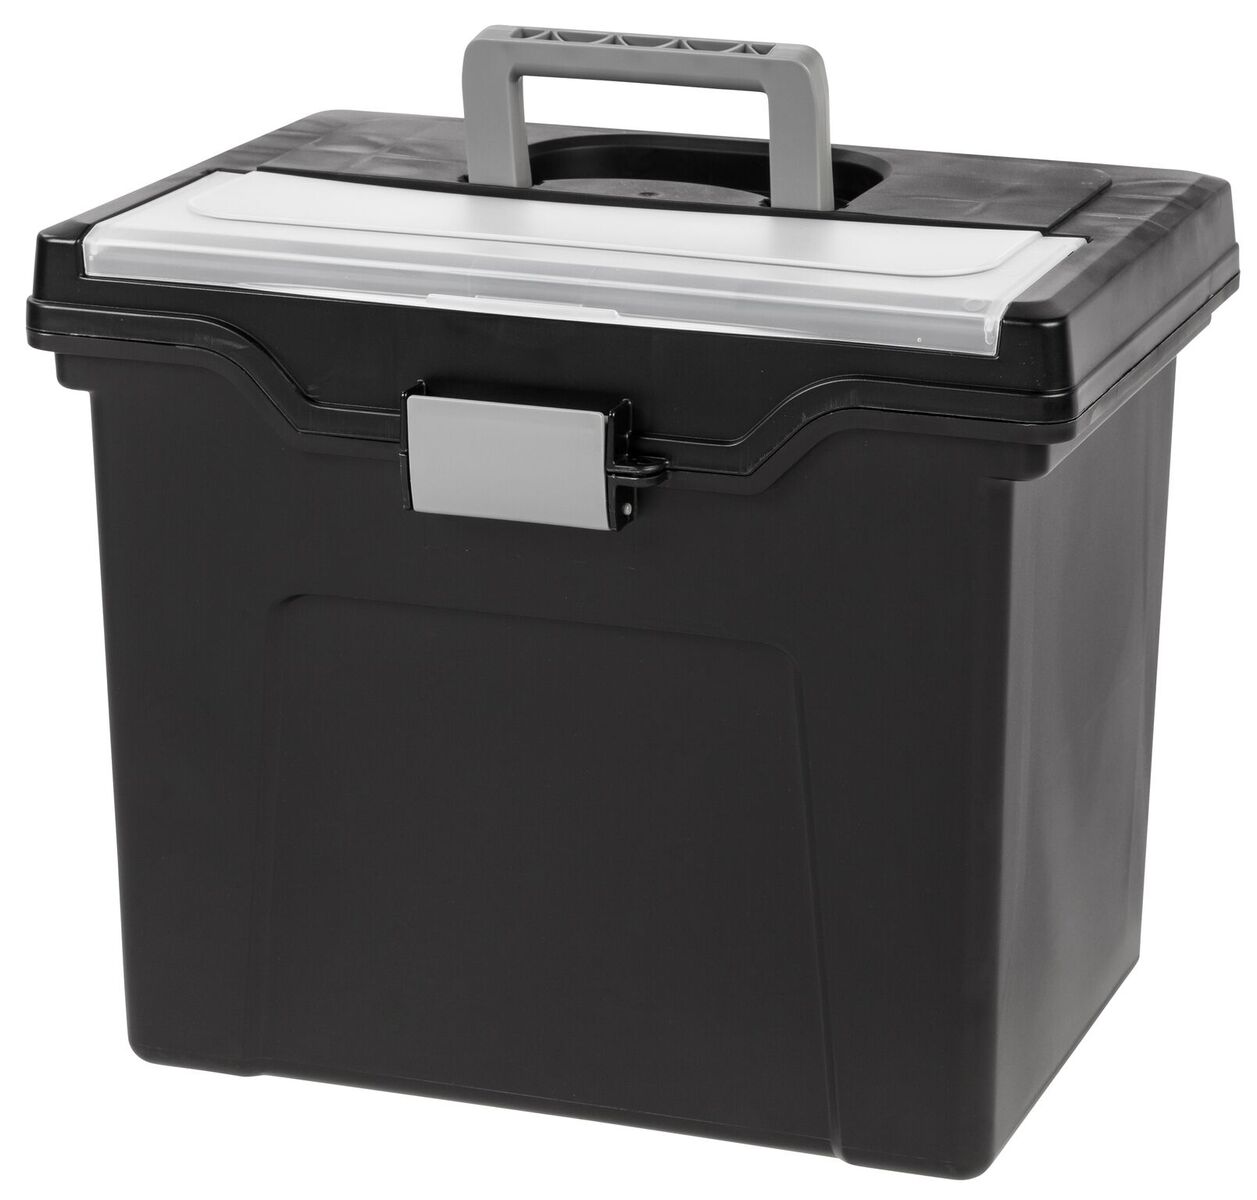 Portable Letter Size File Box with Organizer Lid